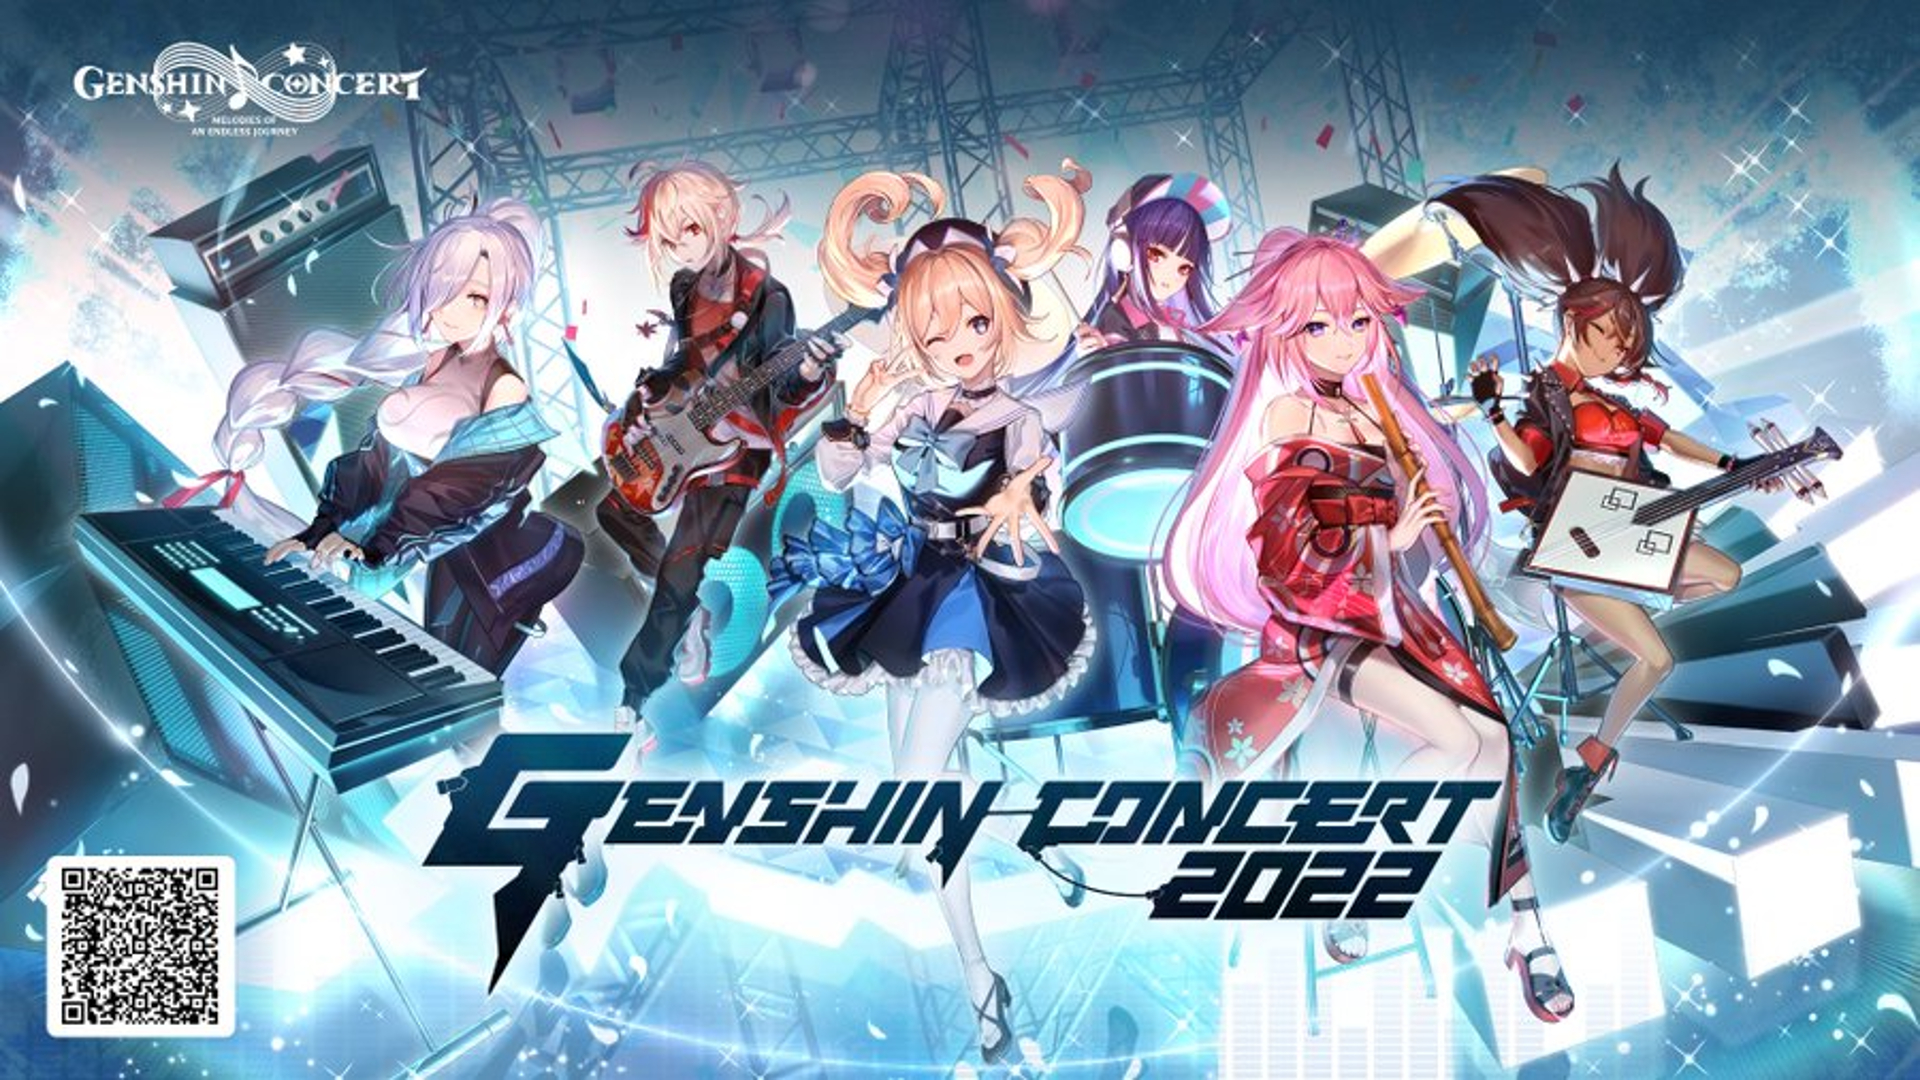 The Genshin Impact Concert 2022 Is Happening This Weekend